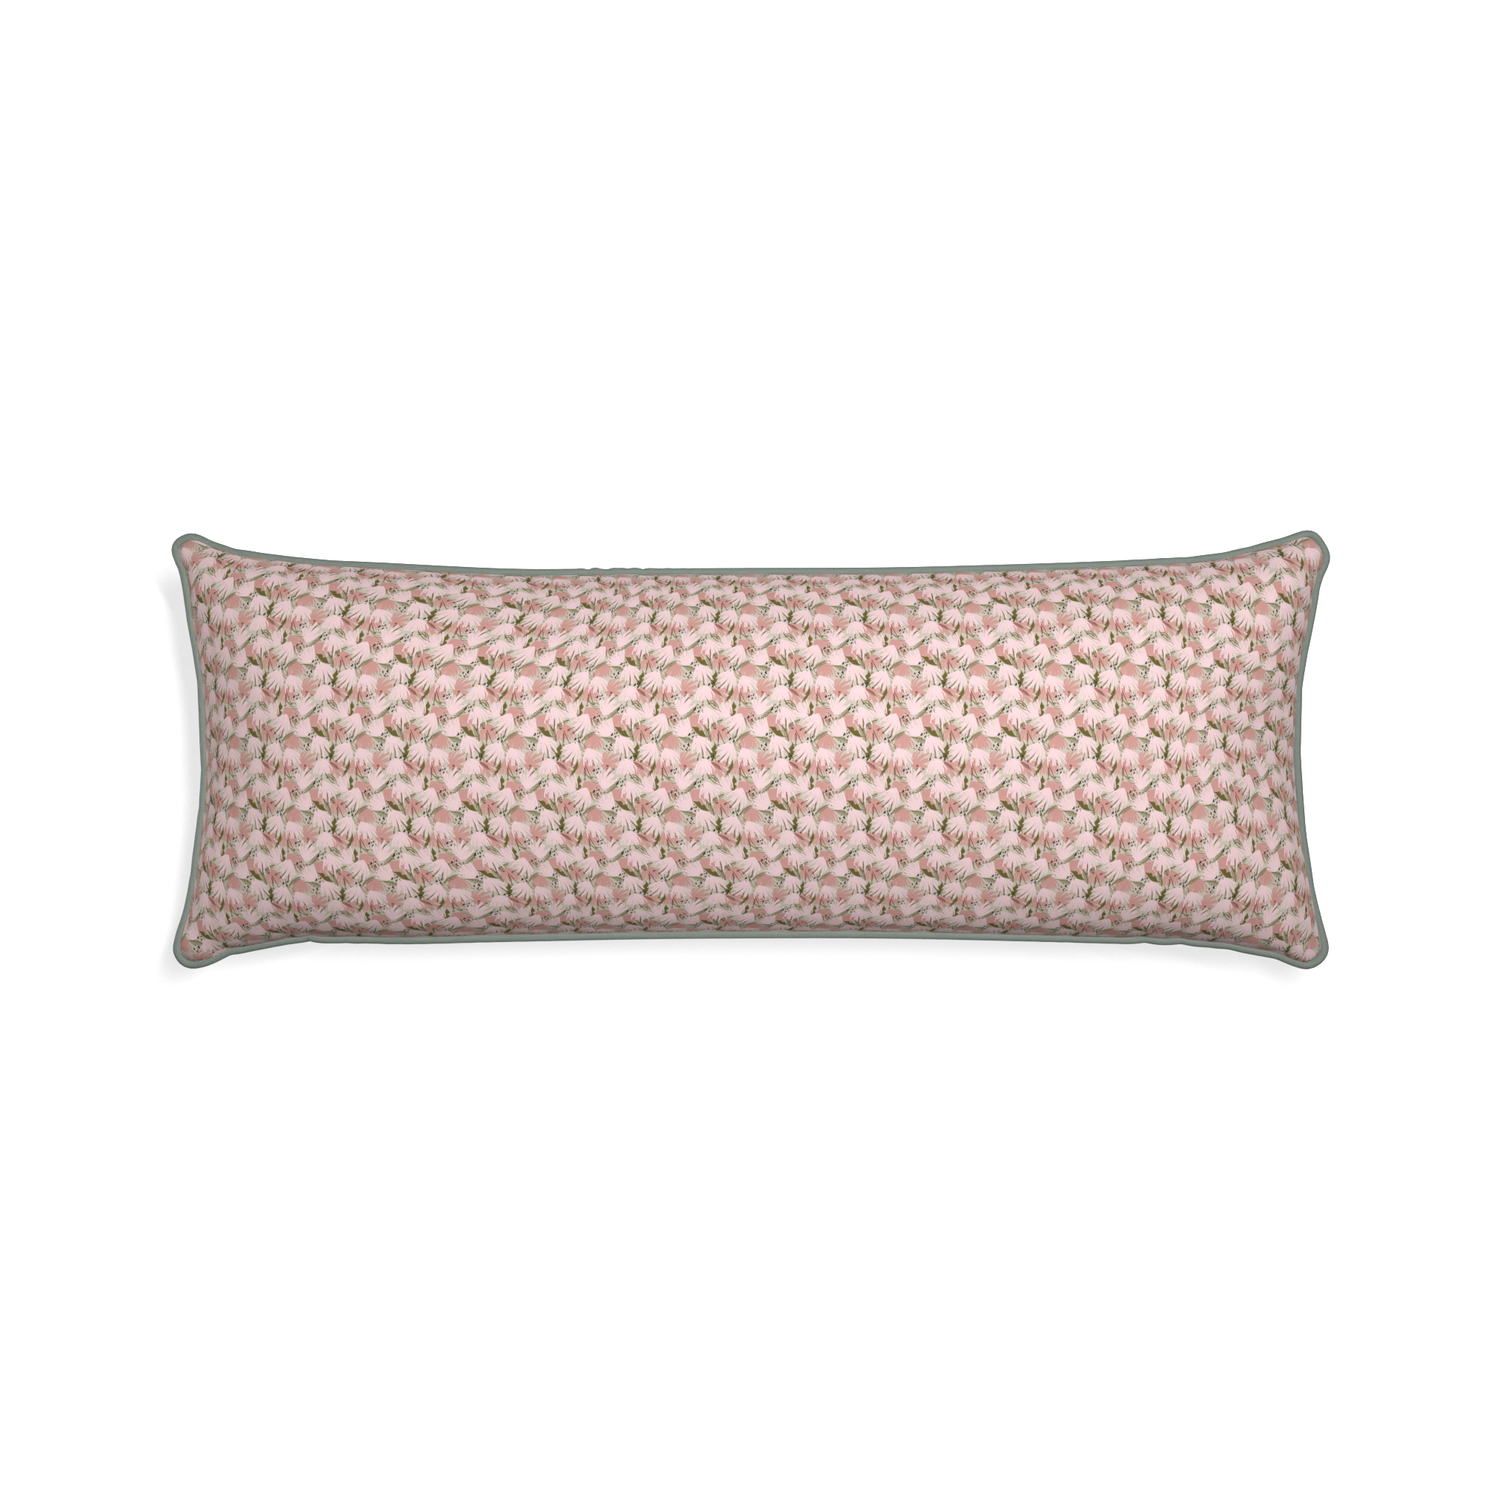 Xl-lumbar eden pink custom pink floralpillow with sage piping on white background